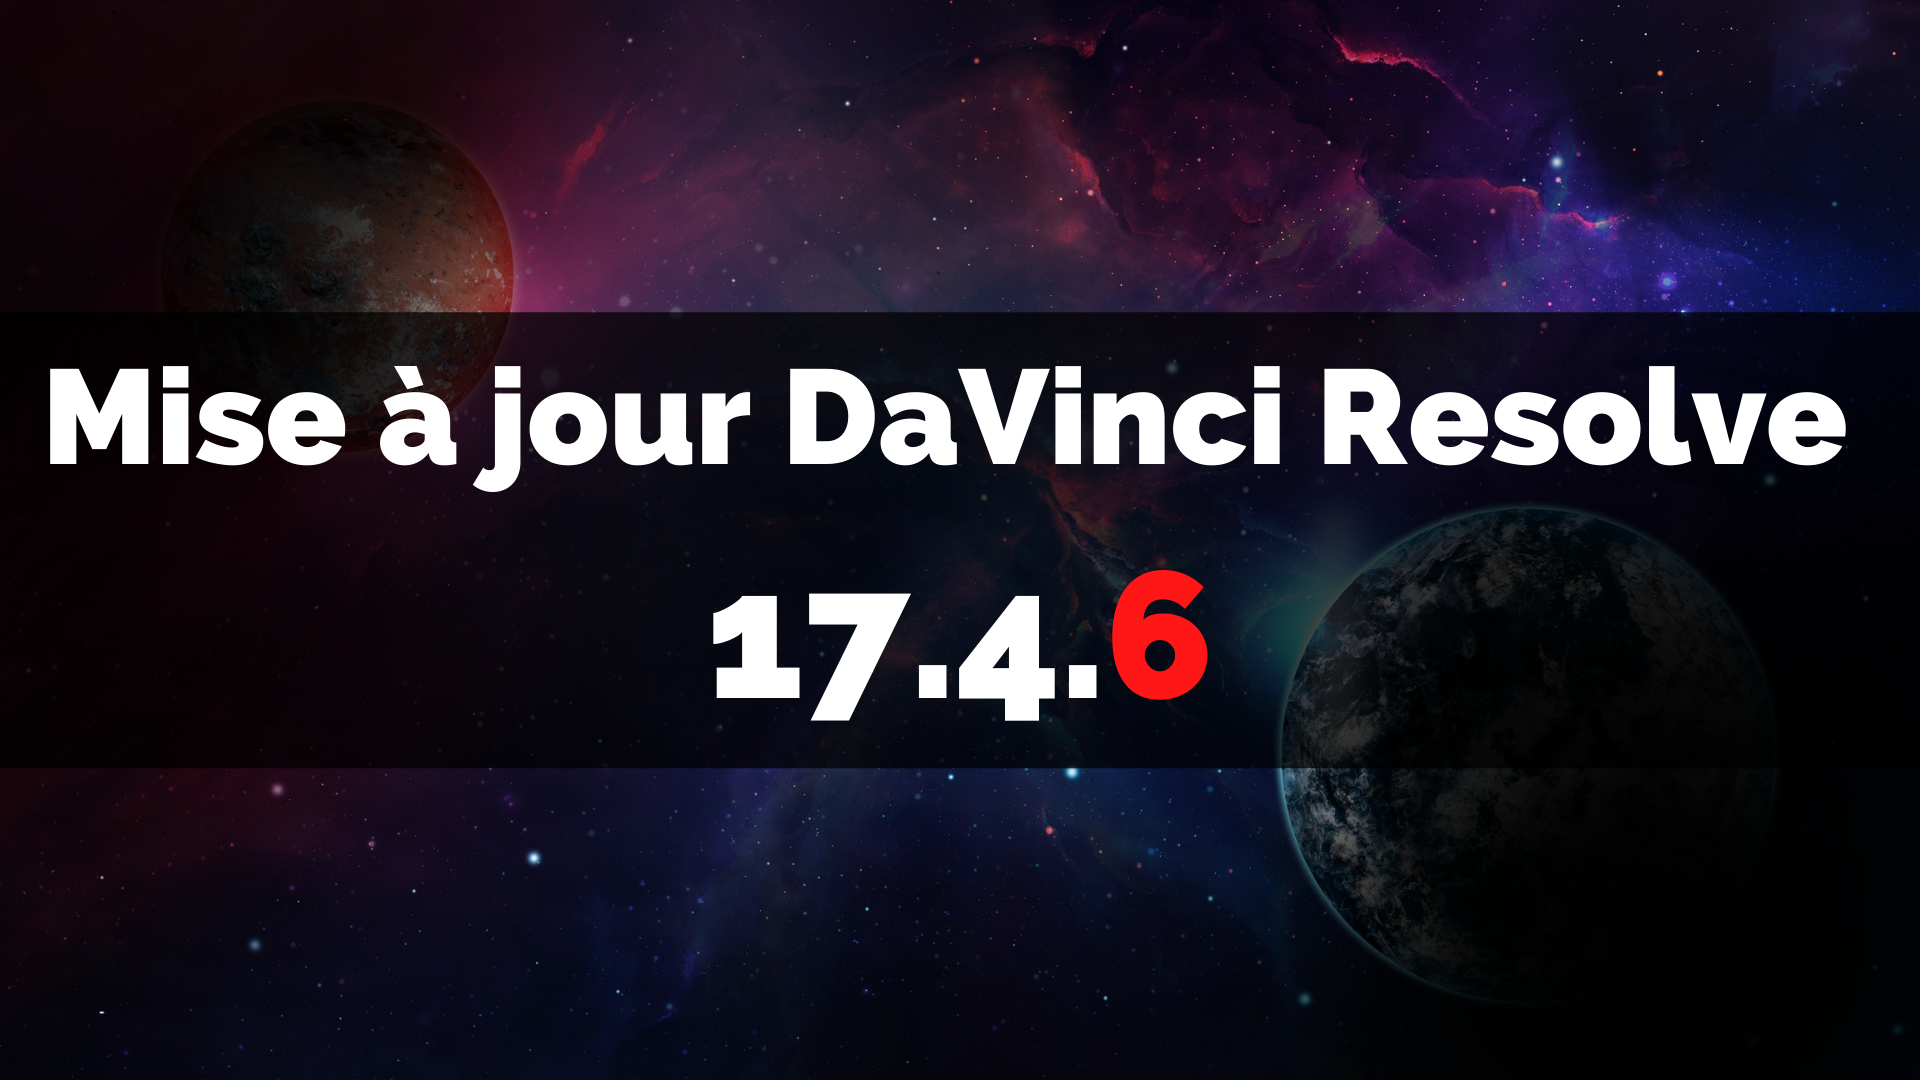 You are currently viewing Mise à jour DaVinci Resolve 17.4.6